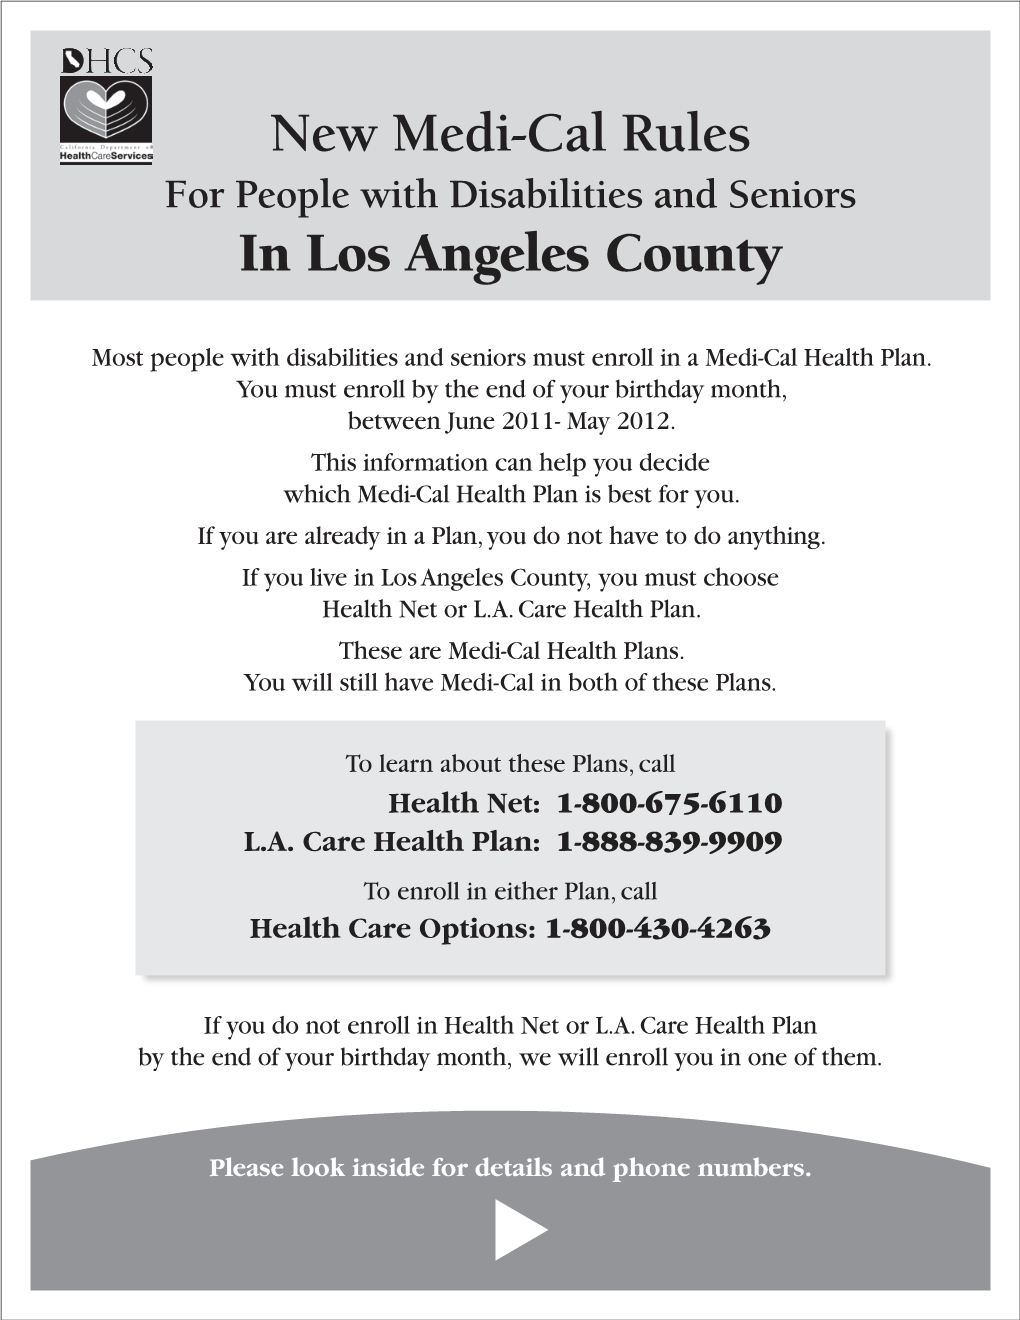 New Medi-Cal Rules in Los Angeles County